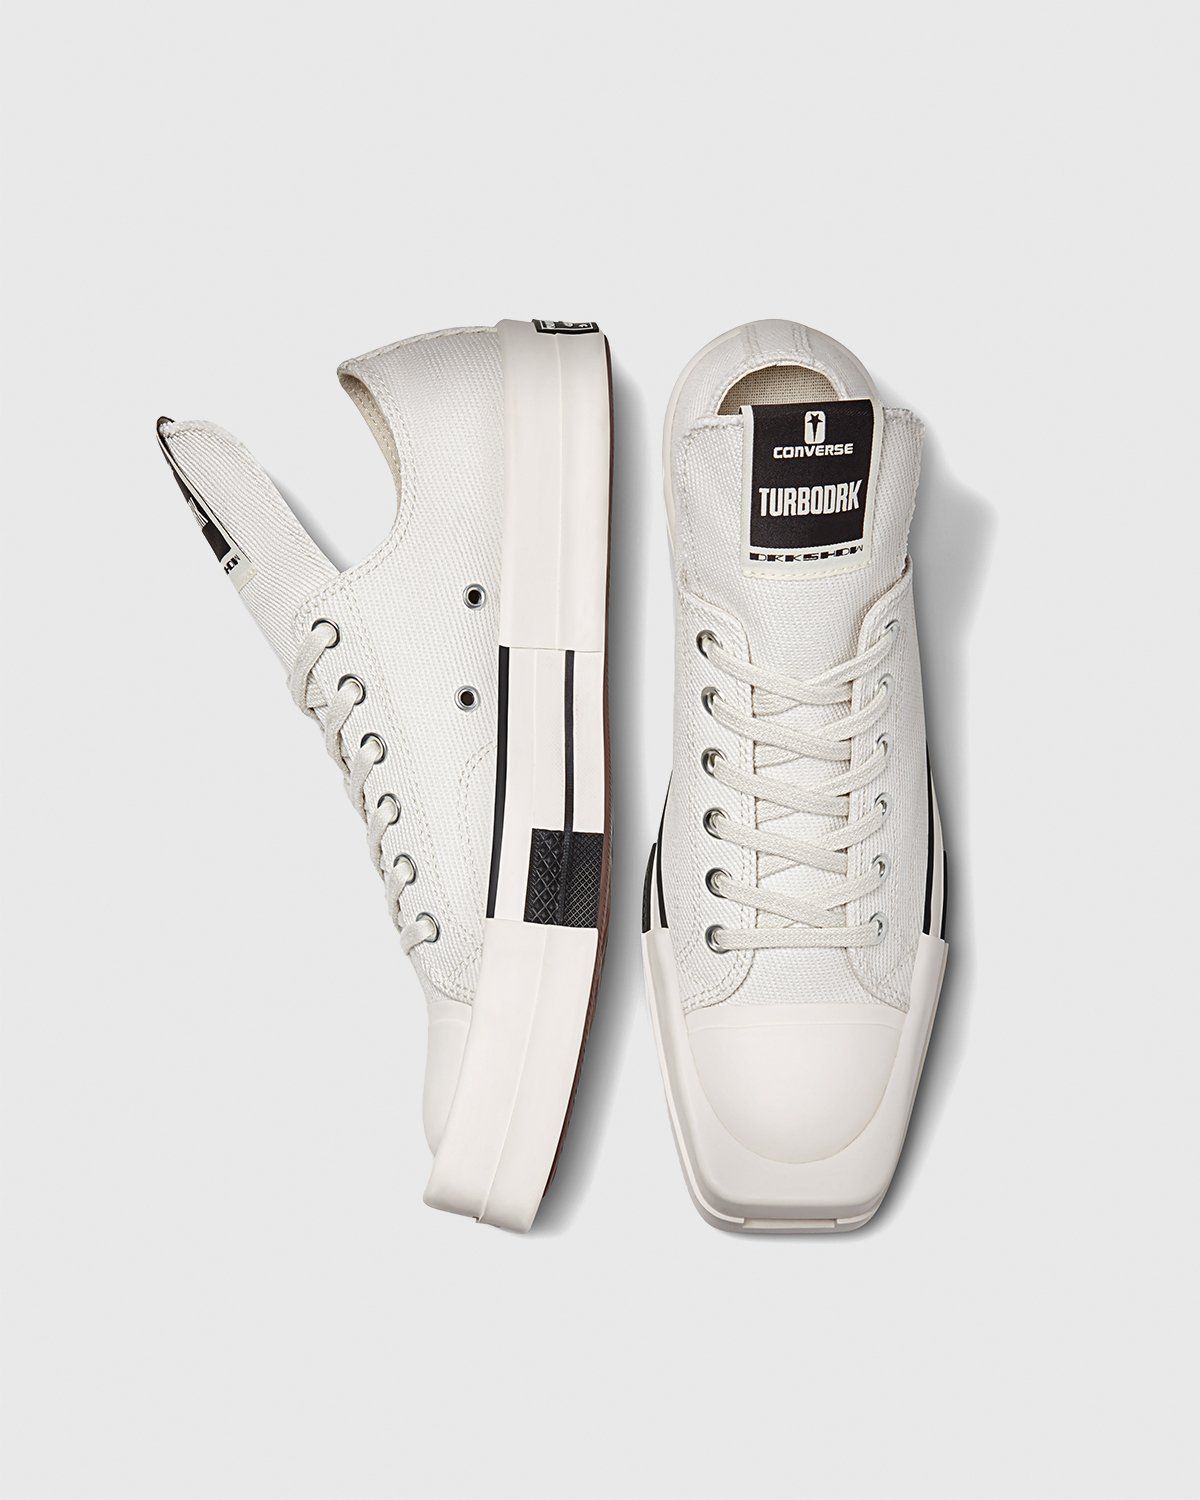 Converse – DRKSHDW TURBODRK Chuck 70 White - Sneakers - White - Image 3